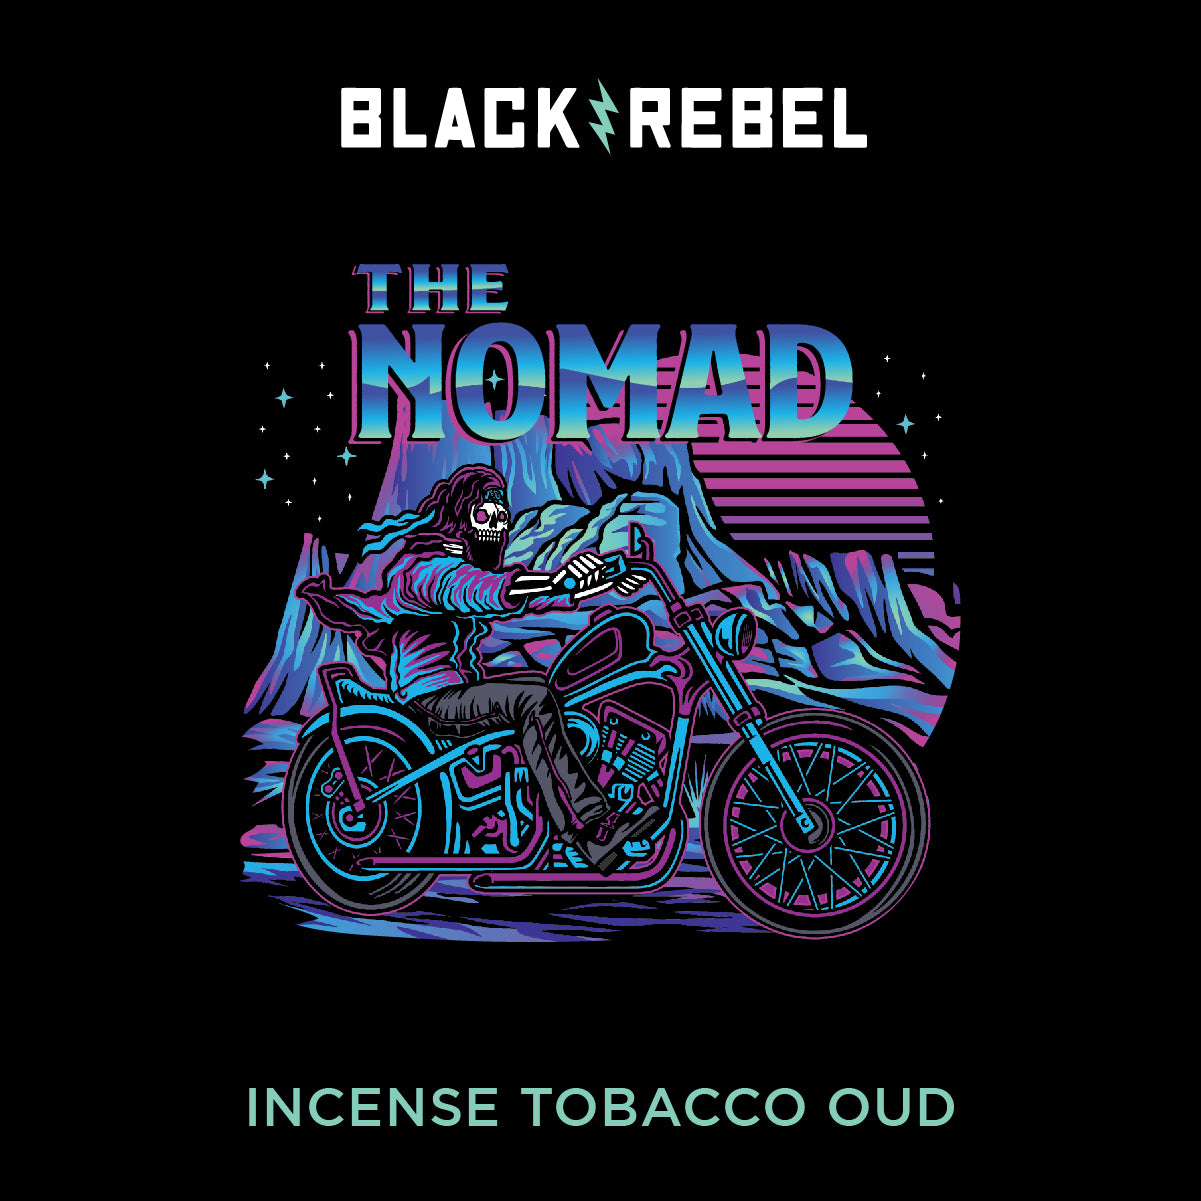 THE NOMAD (incense tobacco oud)